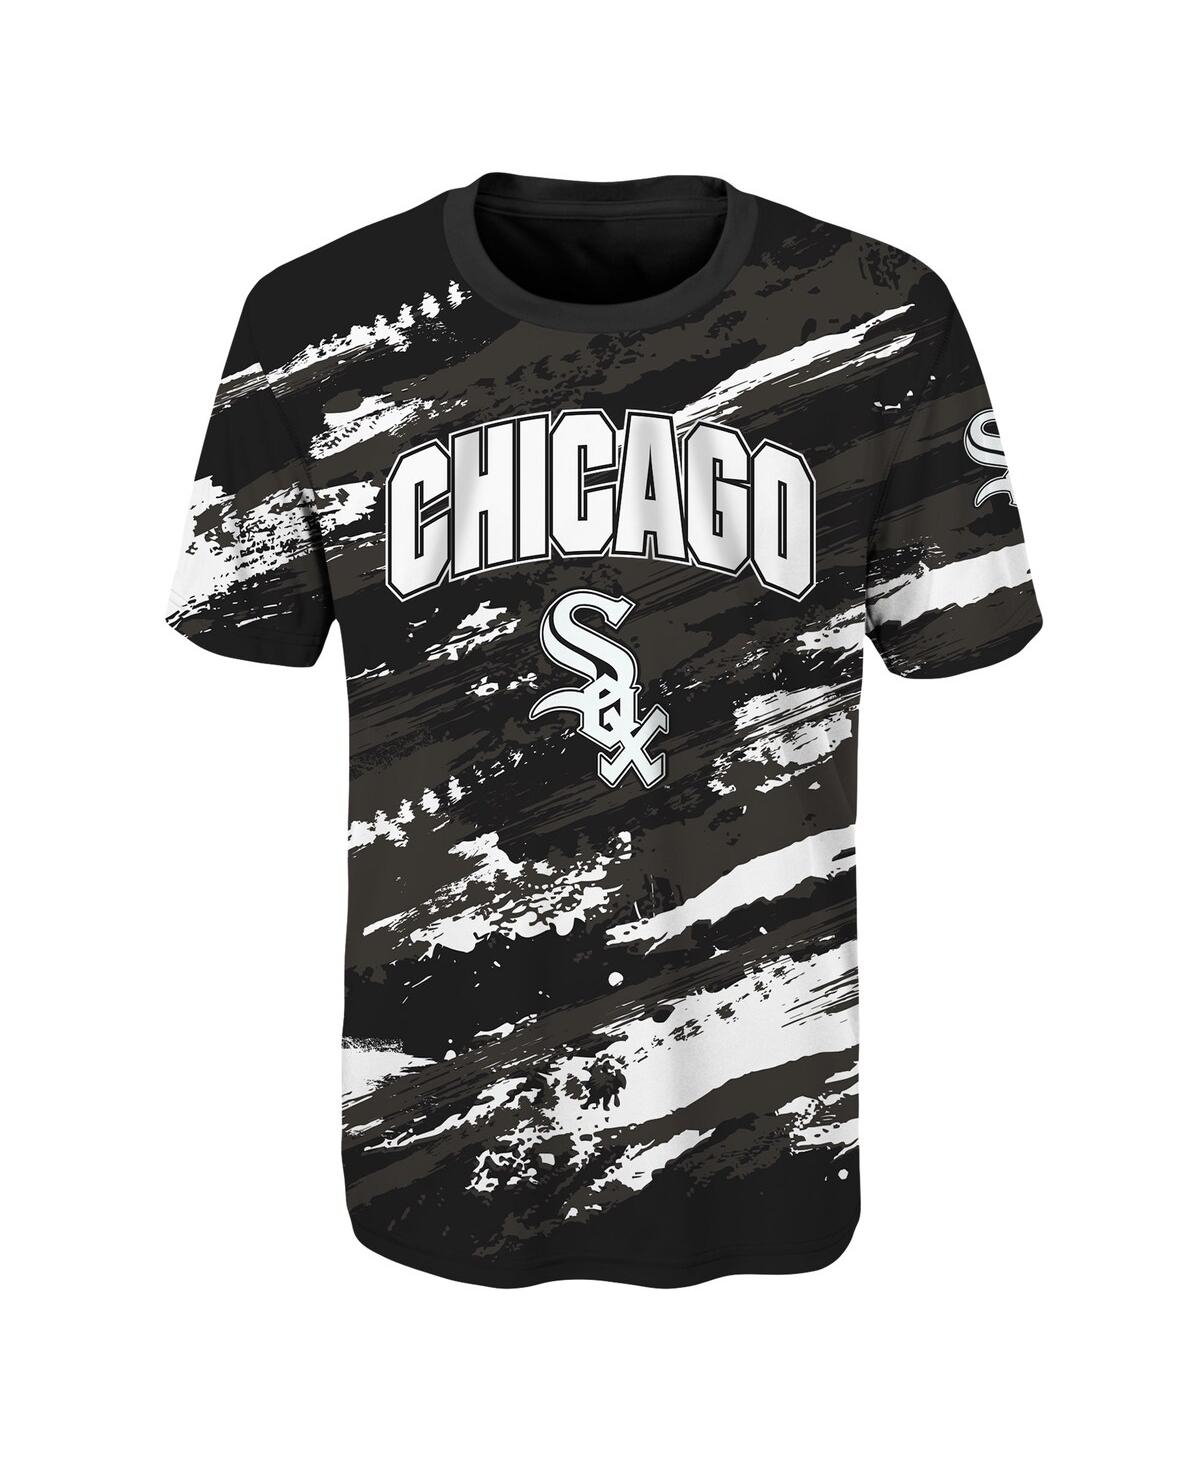 Shop Outerstuff Big Boys And Girls Black Chicago White Sox Stealing Home T-shirt